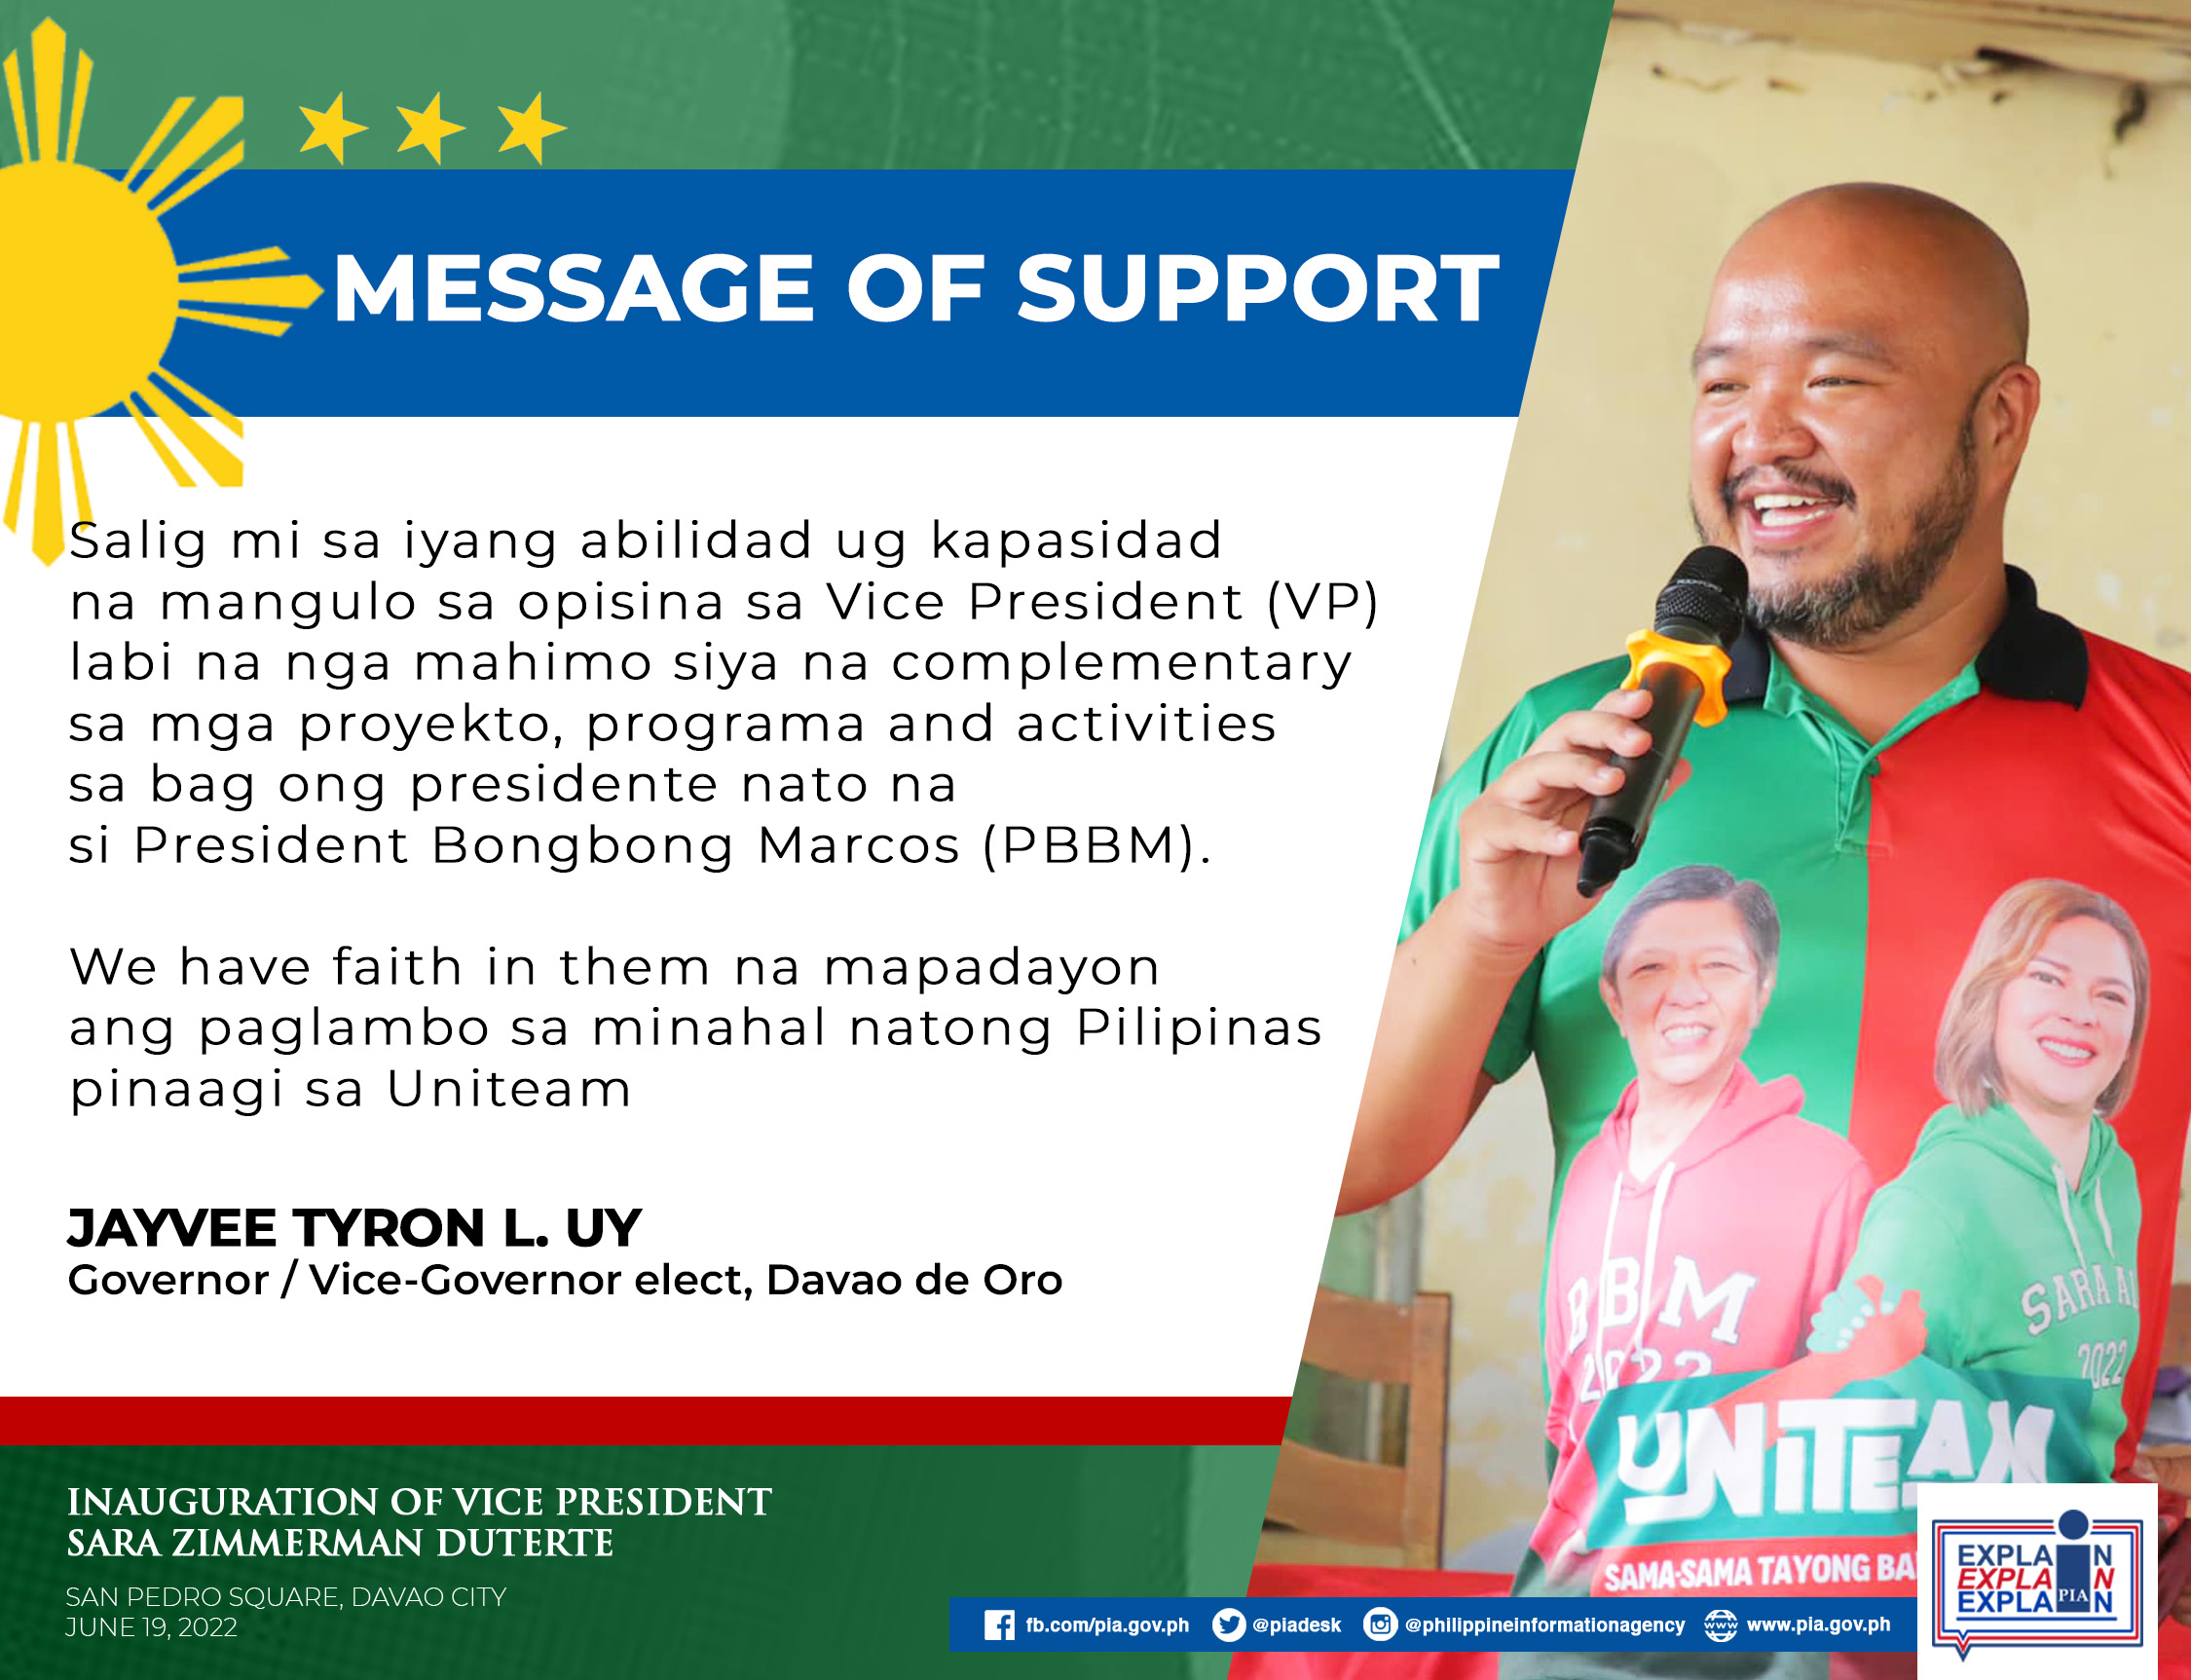 Message of Davao de Oro Governor / Vice-Governor elect Jayvee Tyron L Uy on the Inauguration of Vice President elect Sara Duterte